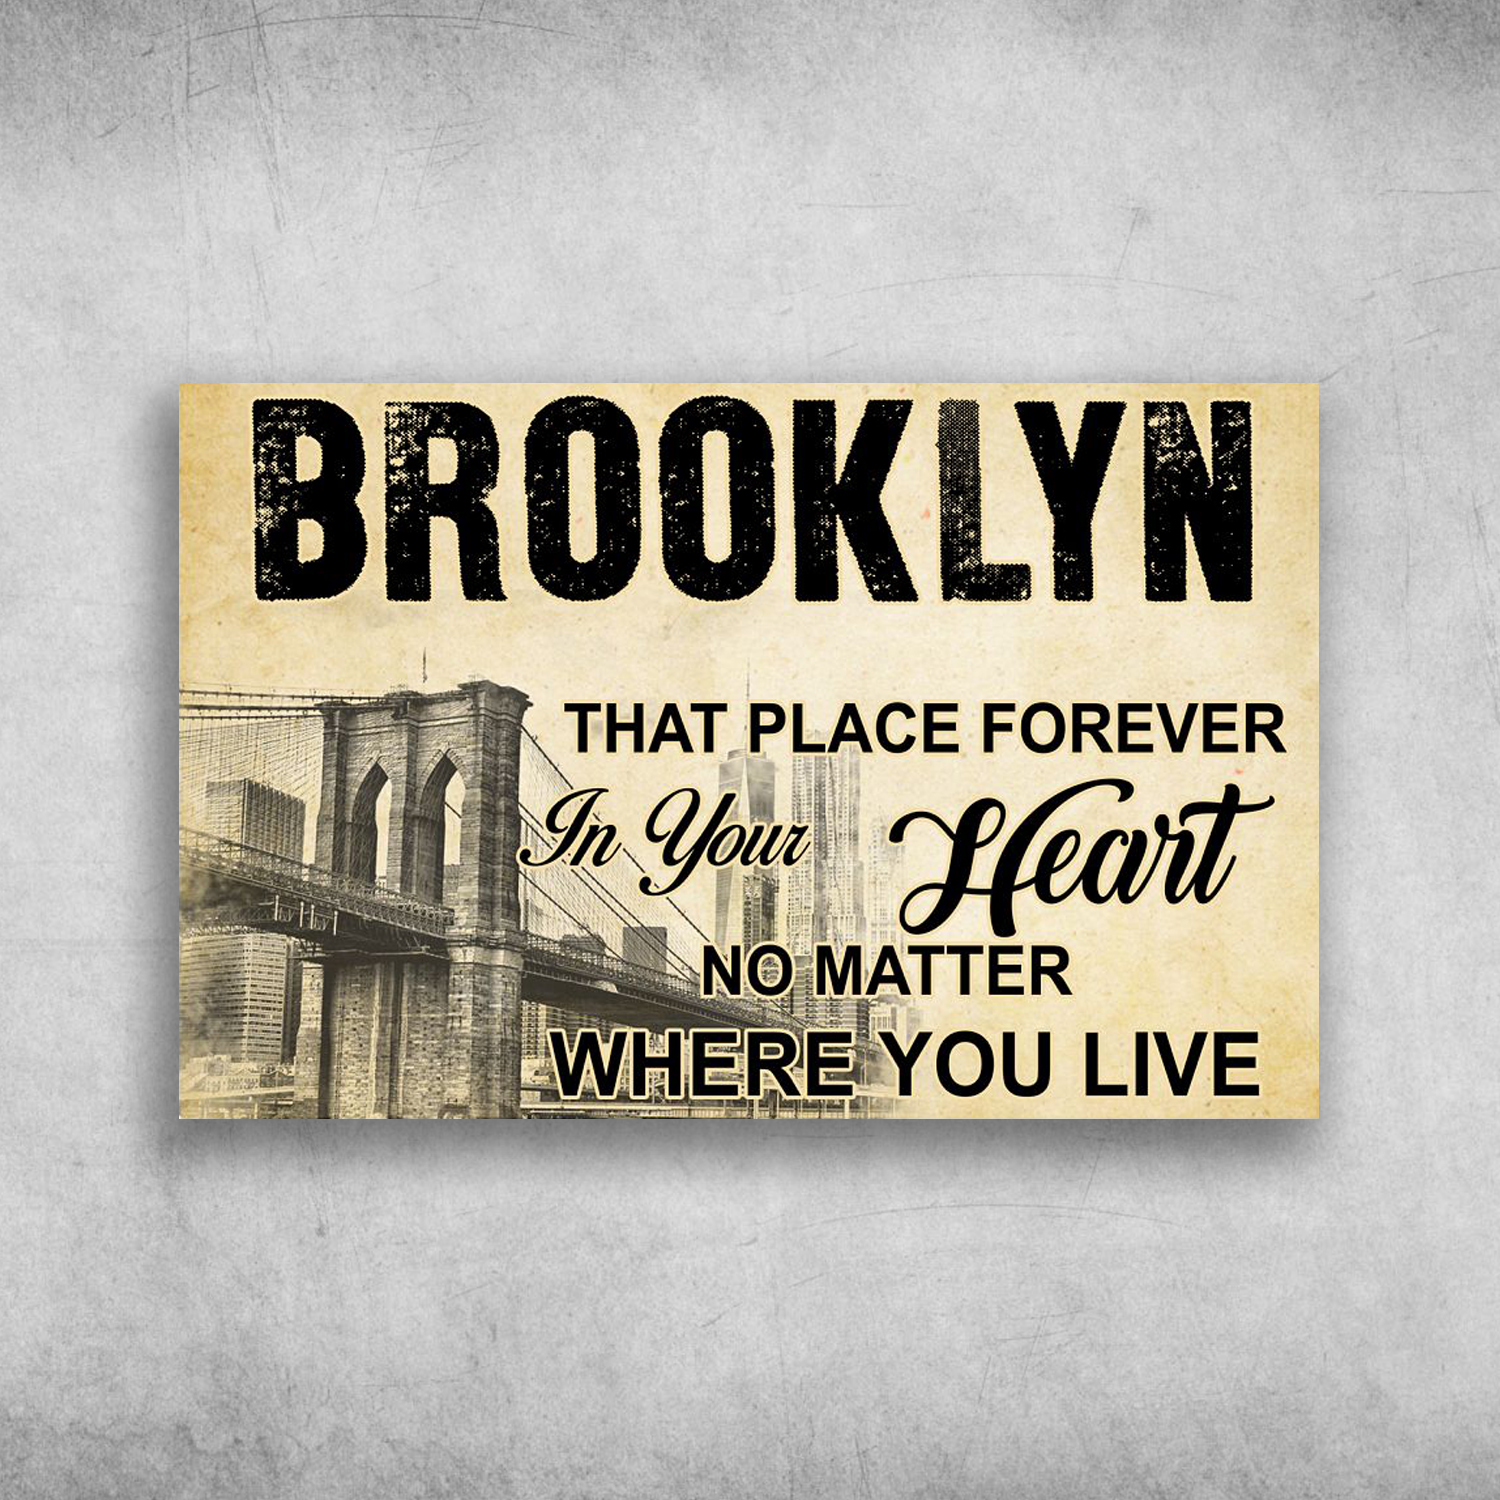 Brooklyn America A Place Your Heart Will Always Be